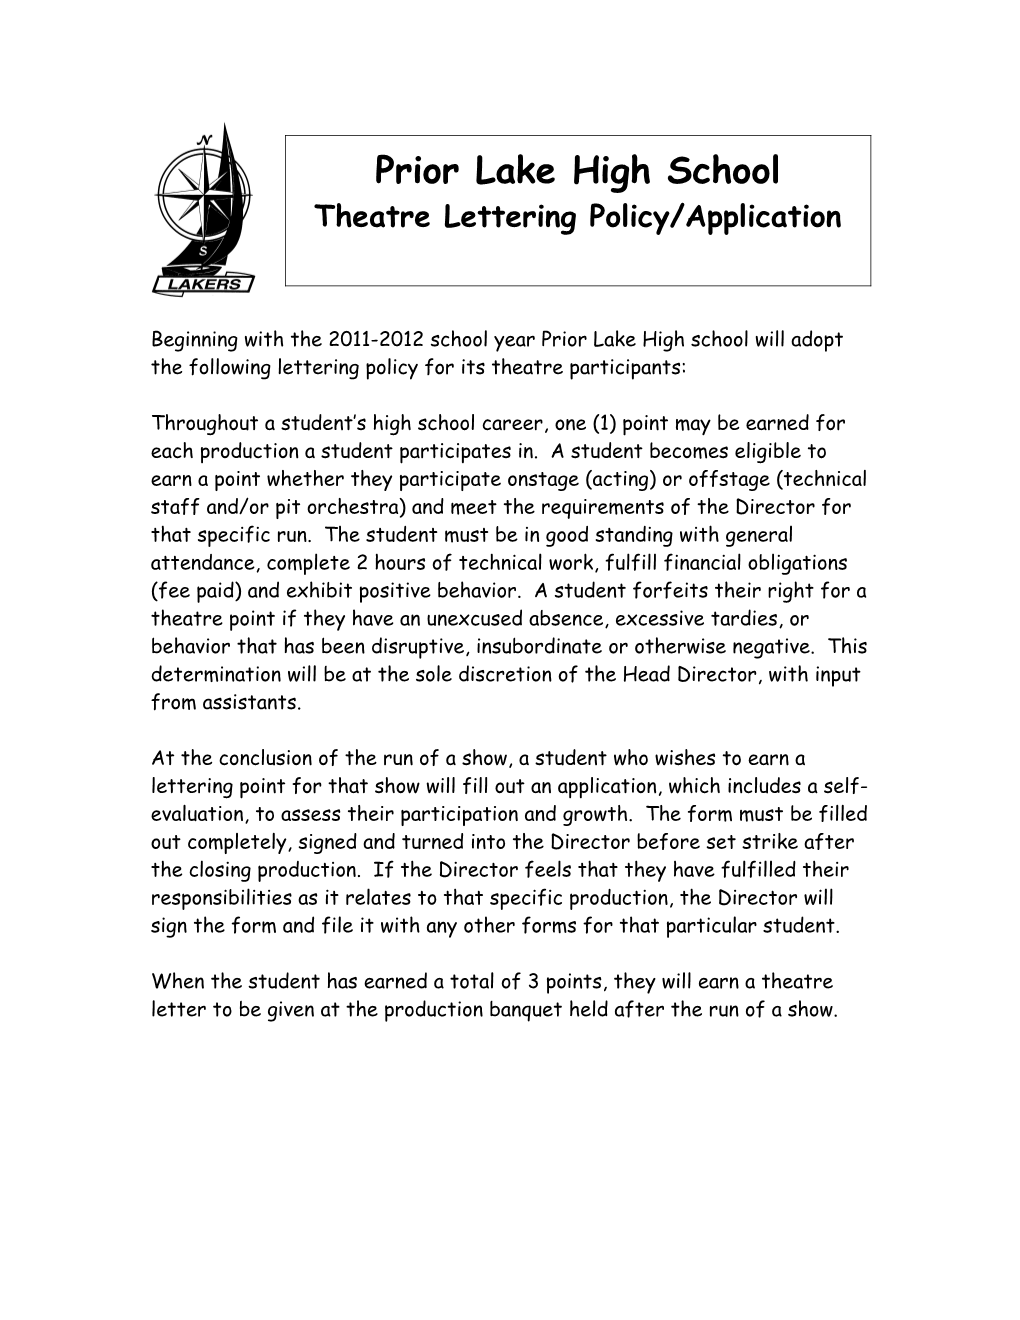 Beginning with the 2011-2012 School Year Prior Lake High School Will Adopt the Following